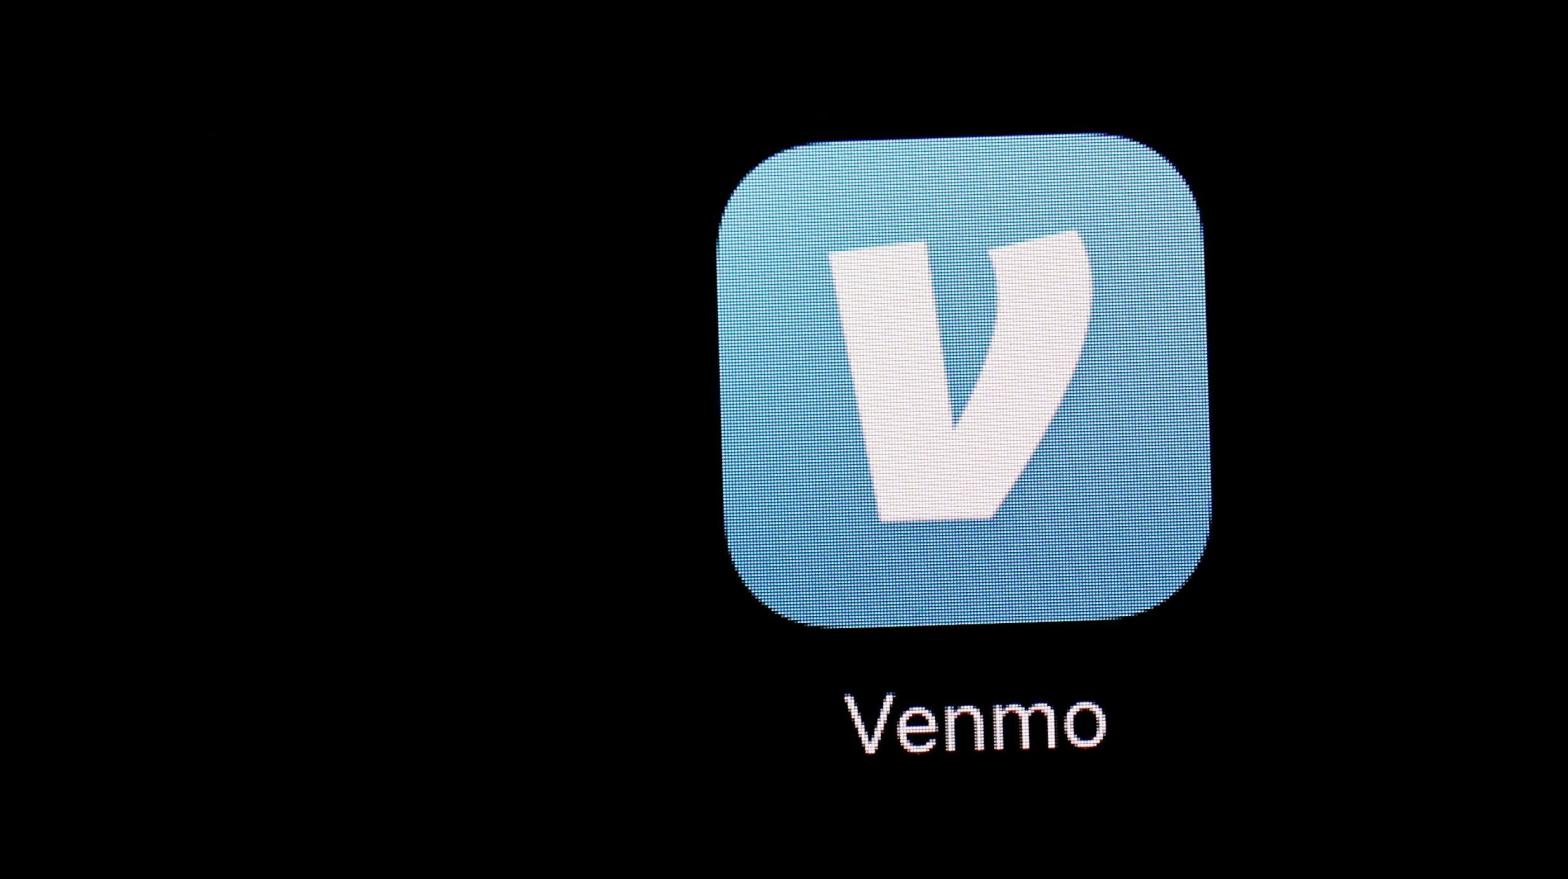 The Venmo logo as shown on a smartphone screen in March 2018. (Photo: Patrick Semansky / File, Getty Images)